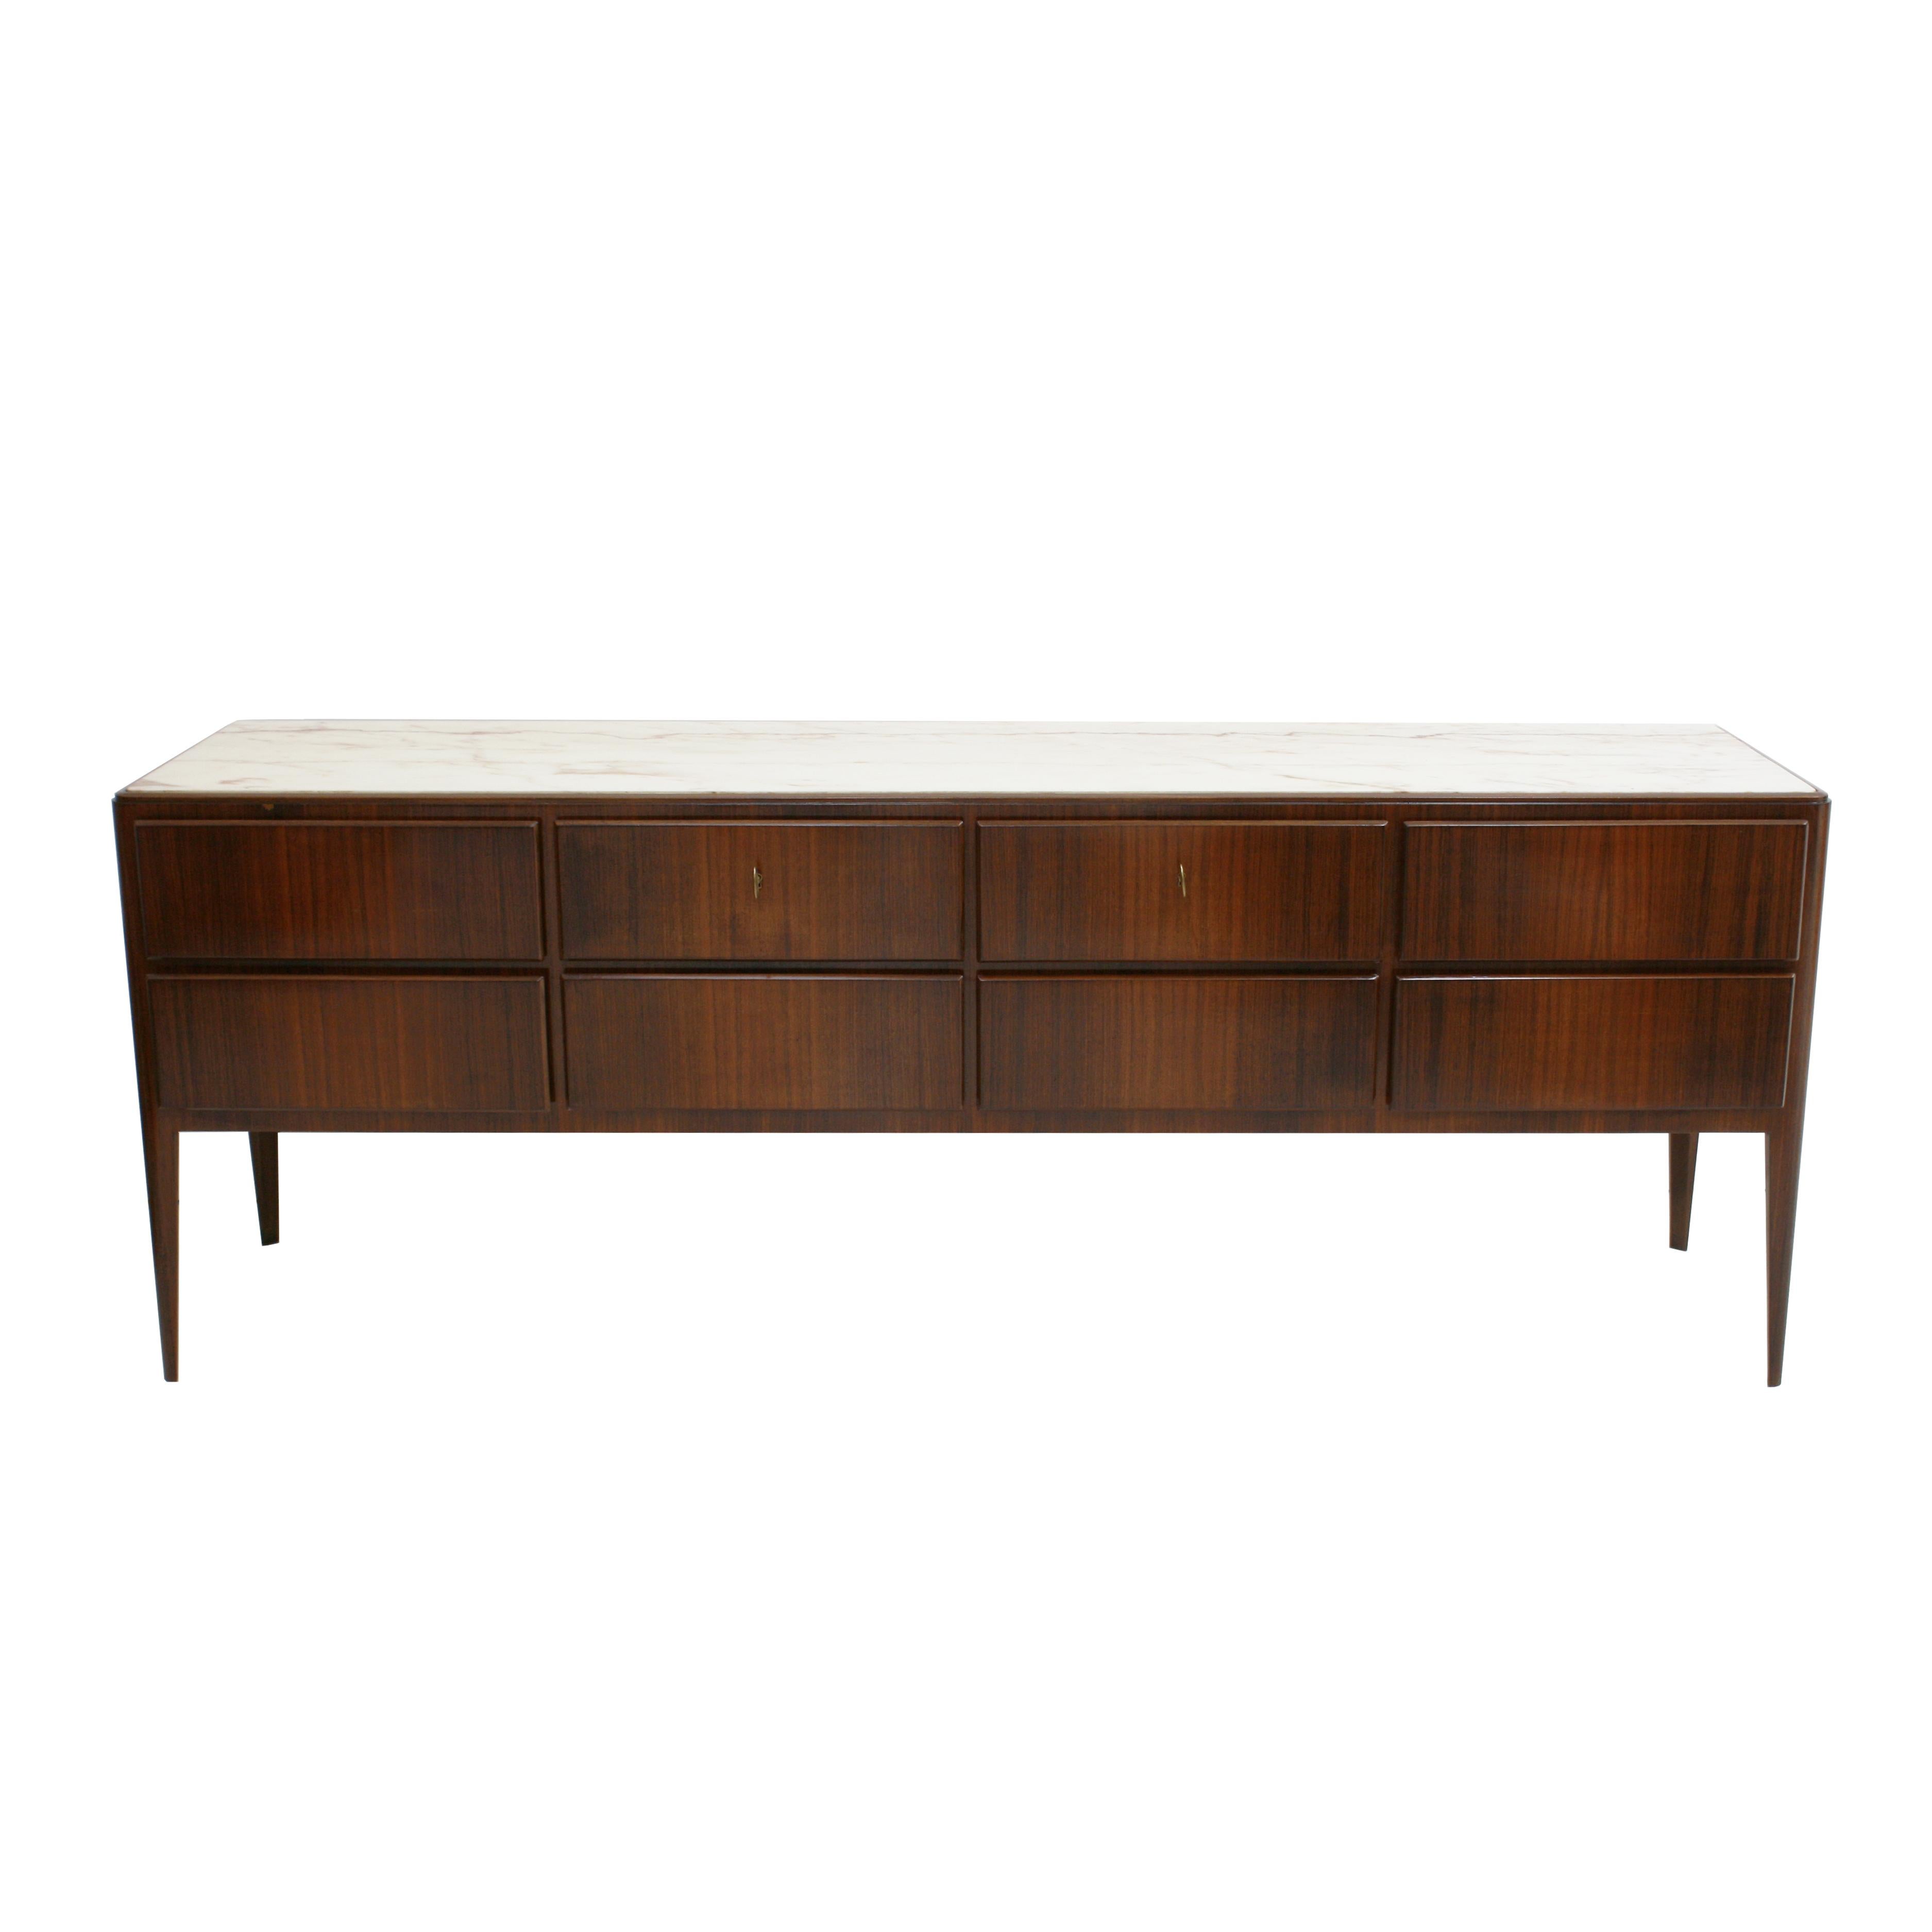 Mid-Century Modern Solid Wood and Marble Italian Sideboard, 1950s